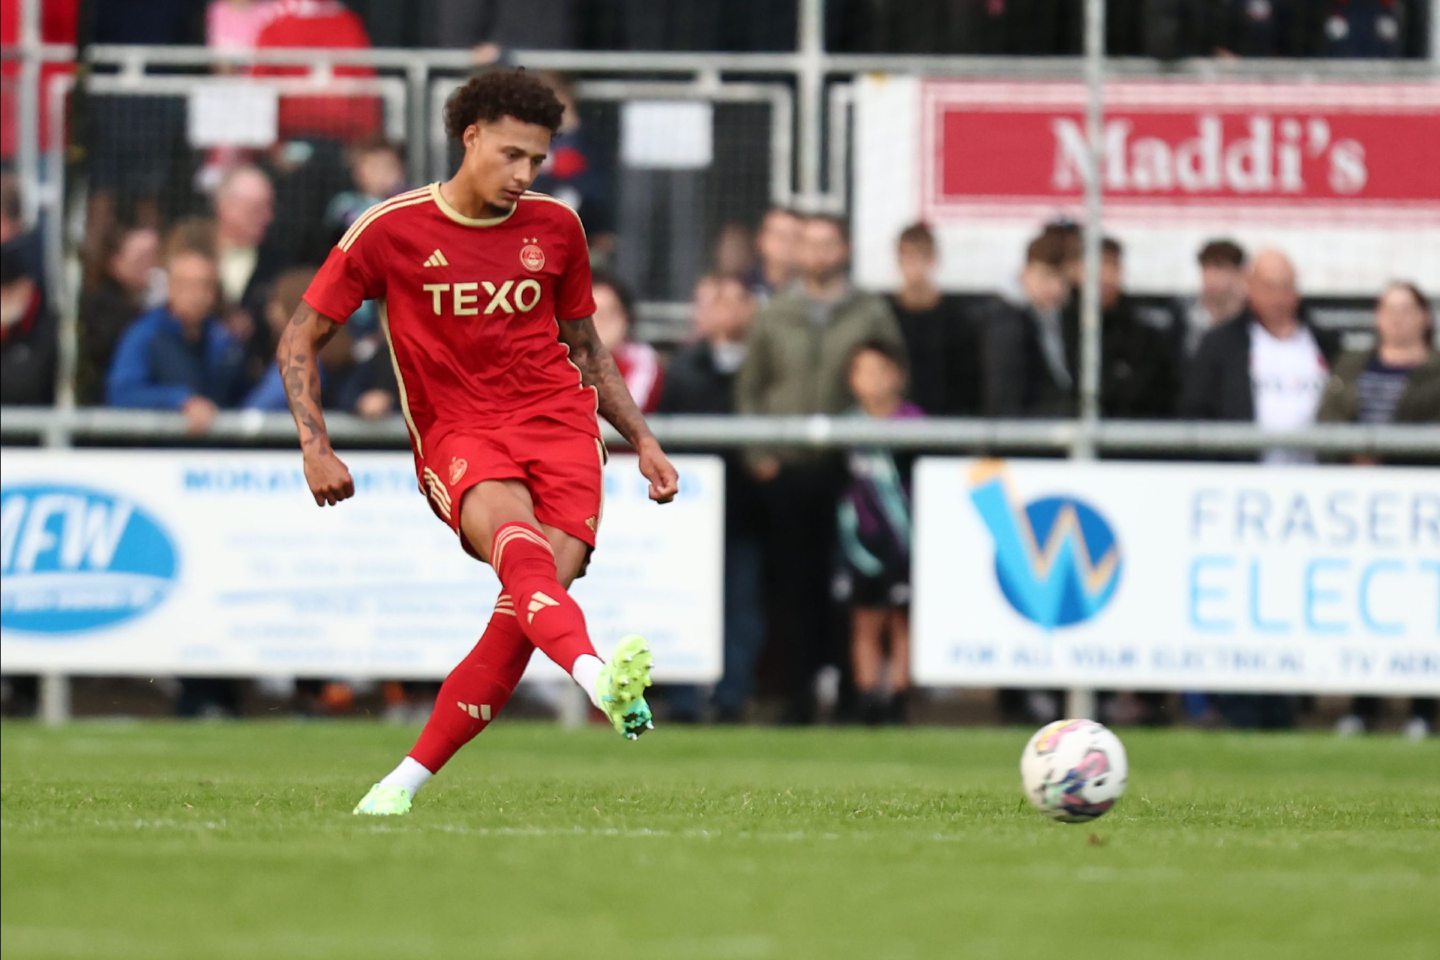 Rhys Williams playing a pass for Aberdeen in the pre-season friendly against Turriff United. Image: Shutterstock.